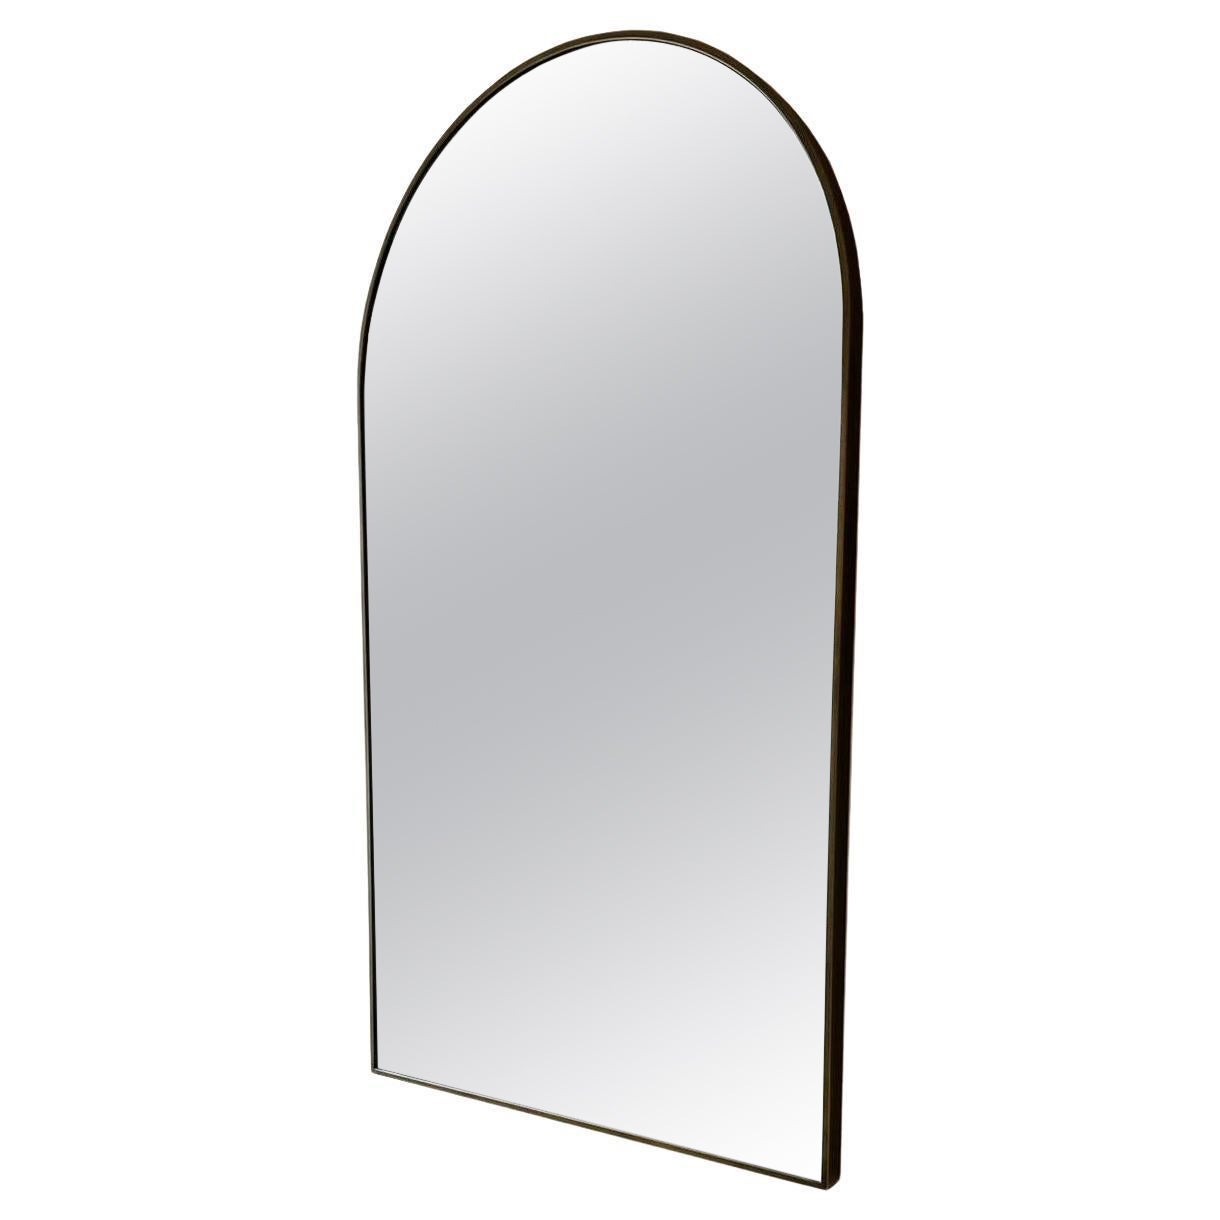 Arched Round Top Clear Mirror with Bronze Frame, Contemporary For Sale